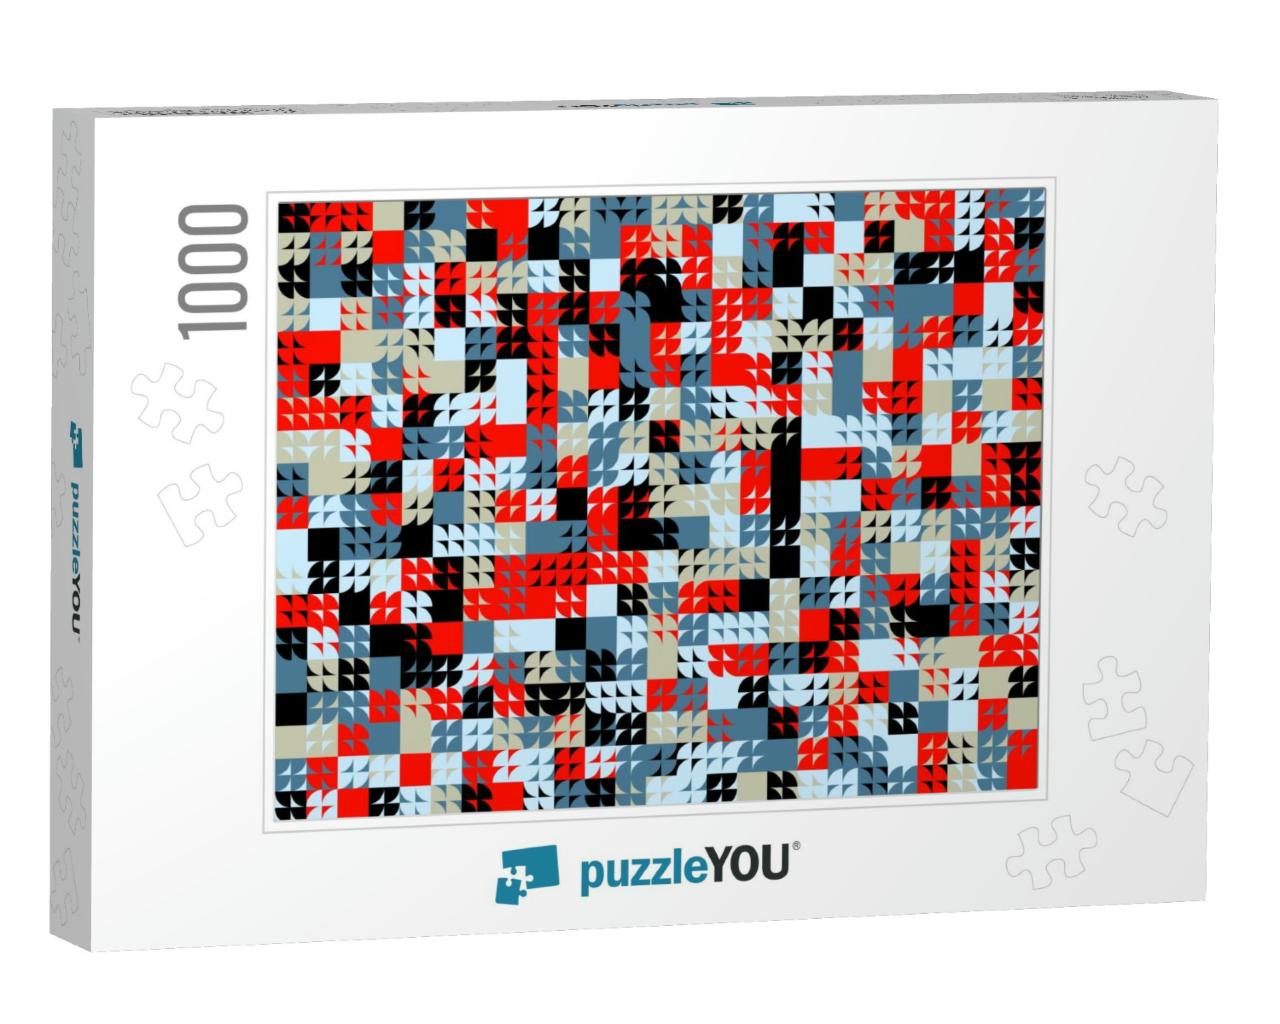 Abstract Mosaic Artwork Design with Simple Shapes & Figur... Jigsaw Puzzle with 1000 pieces